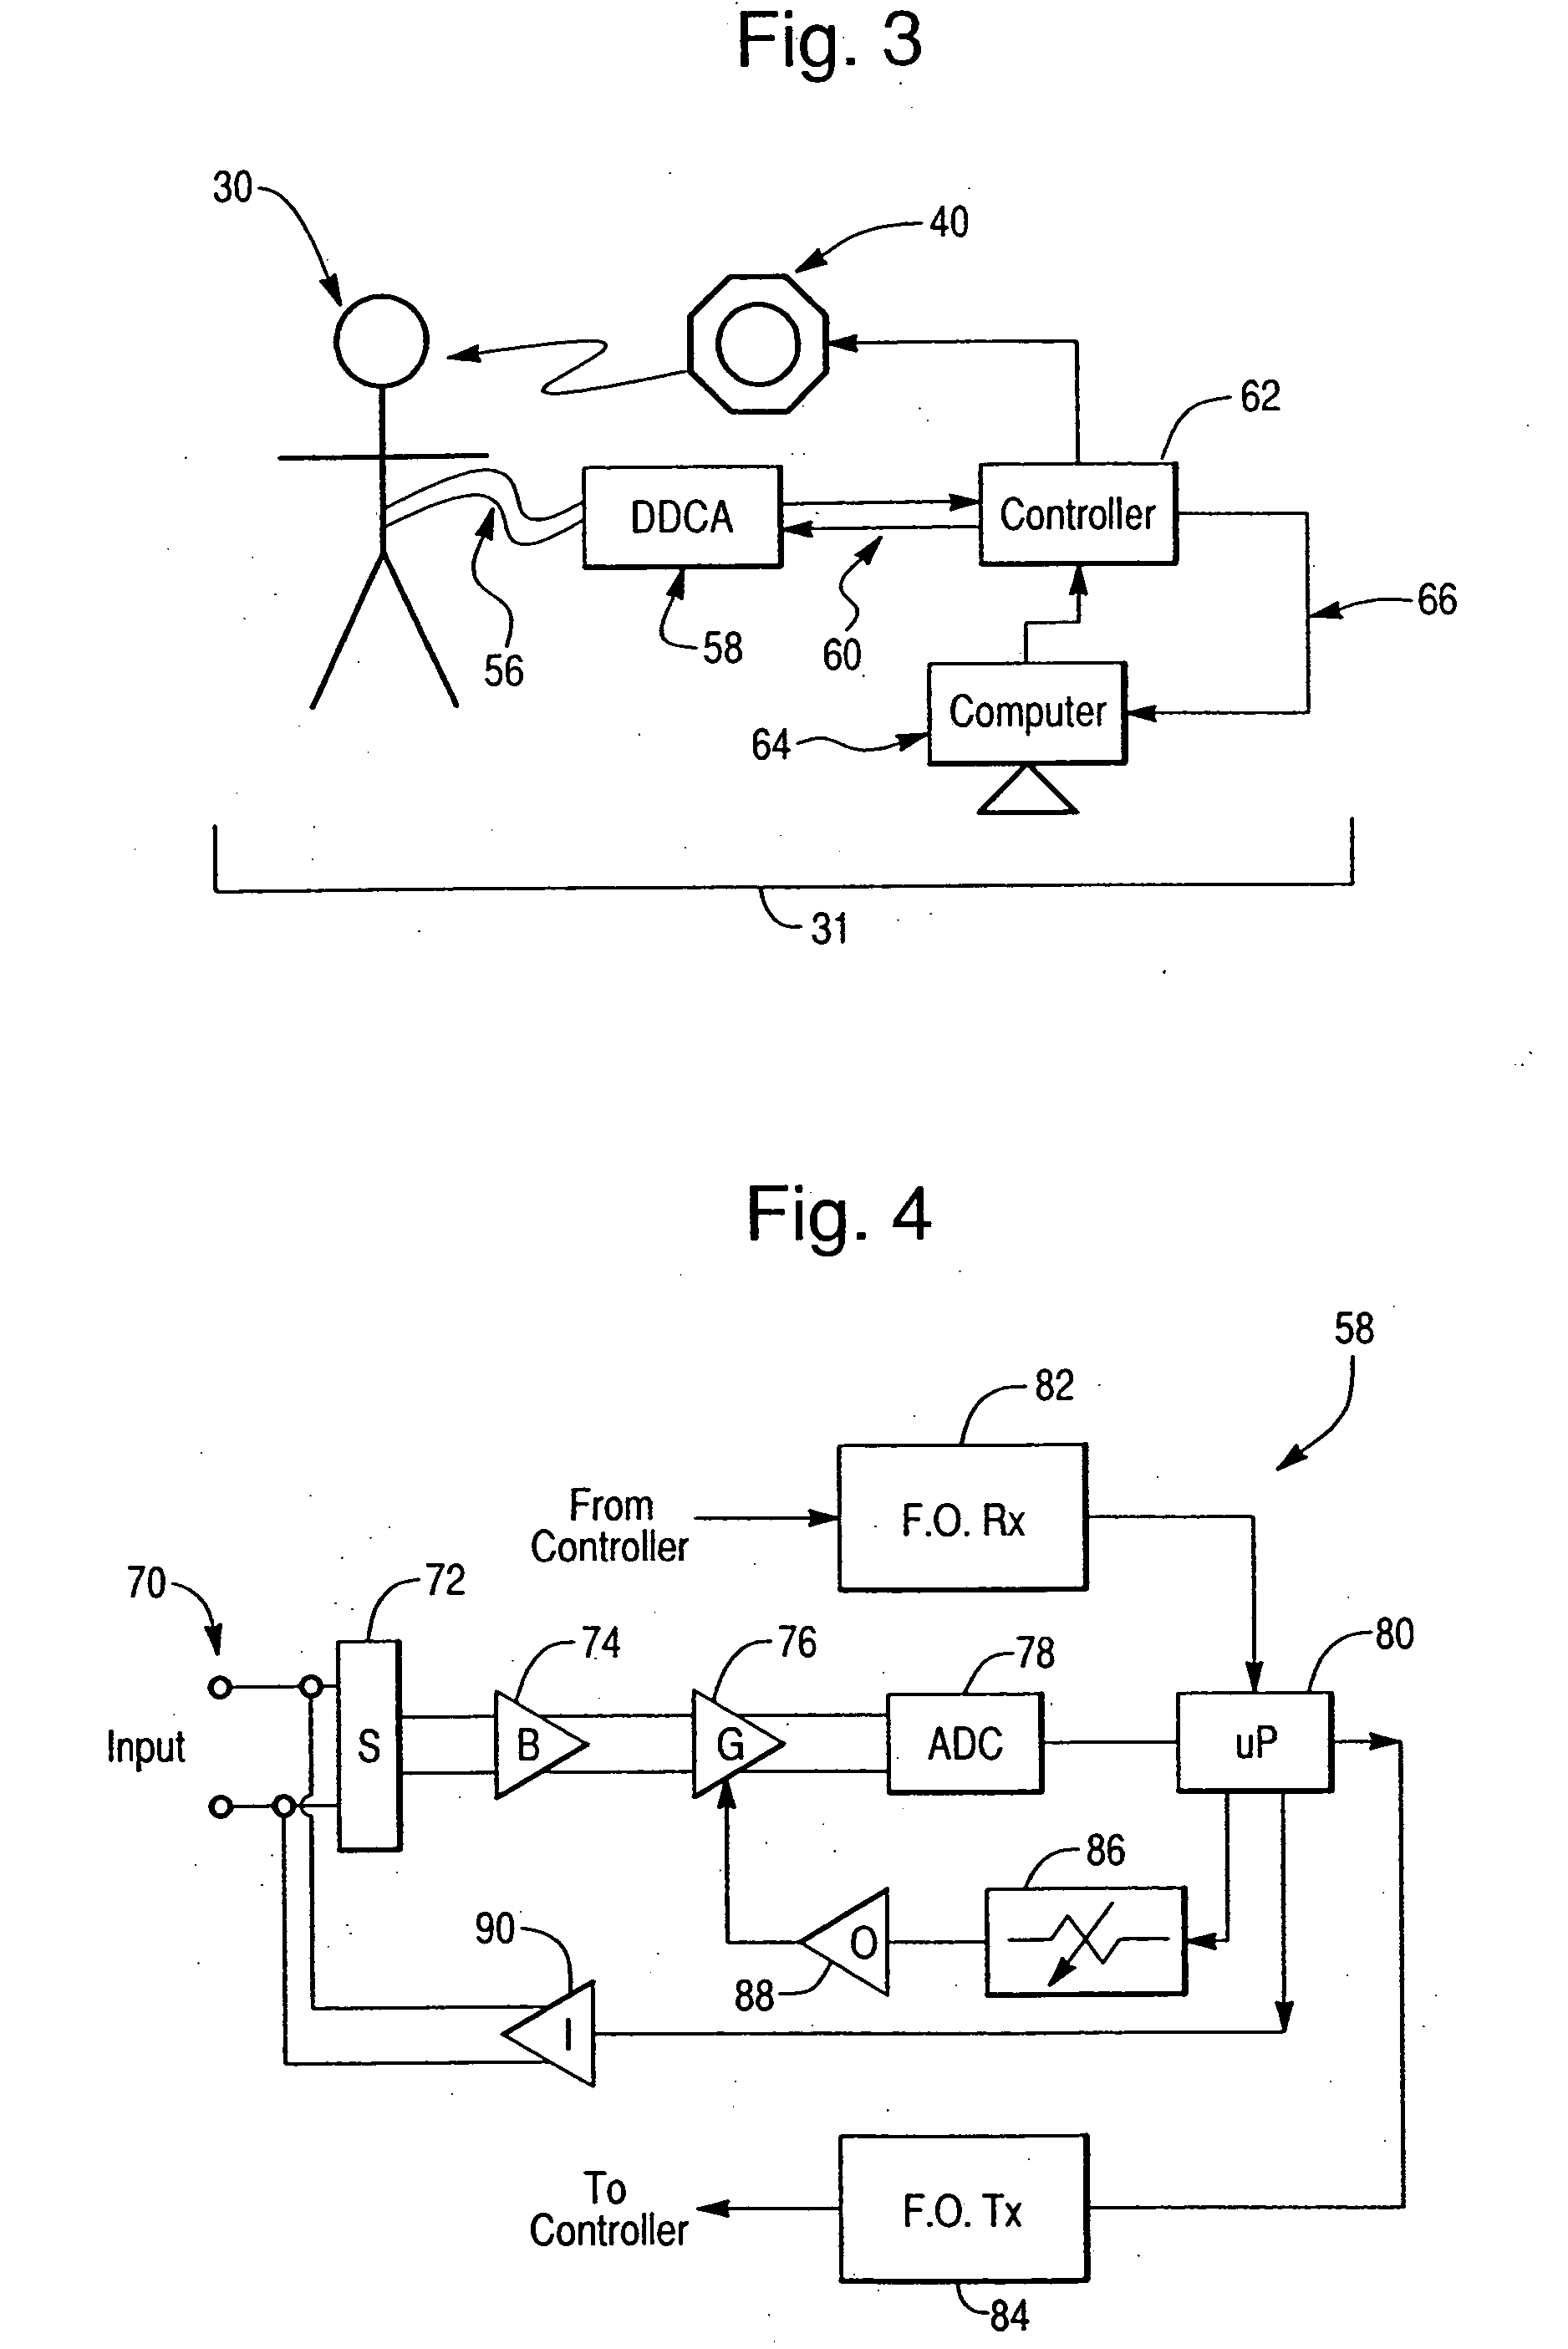 Low noise amplifier for electro-physiological signal sensing